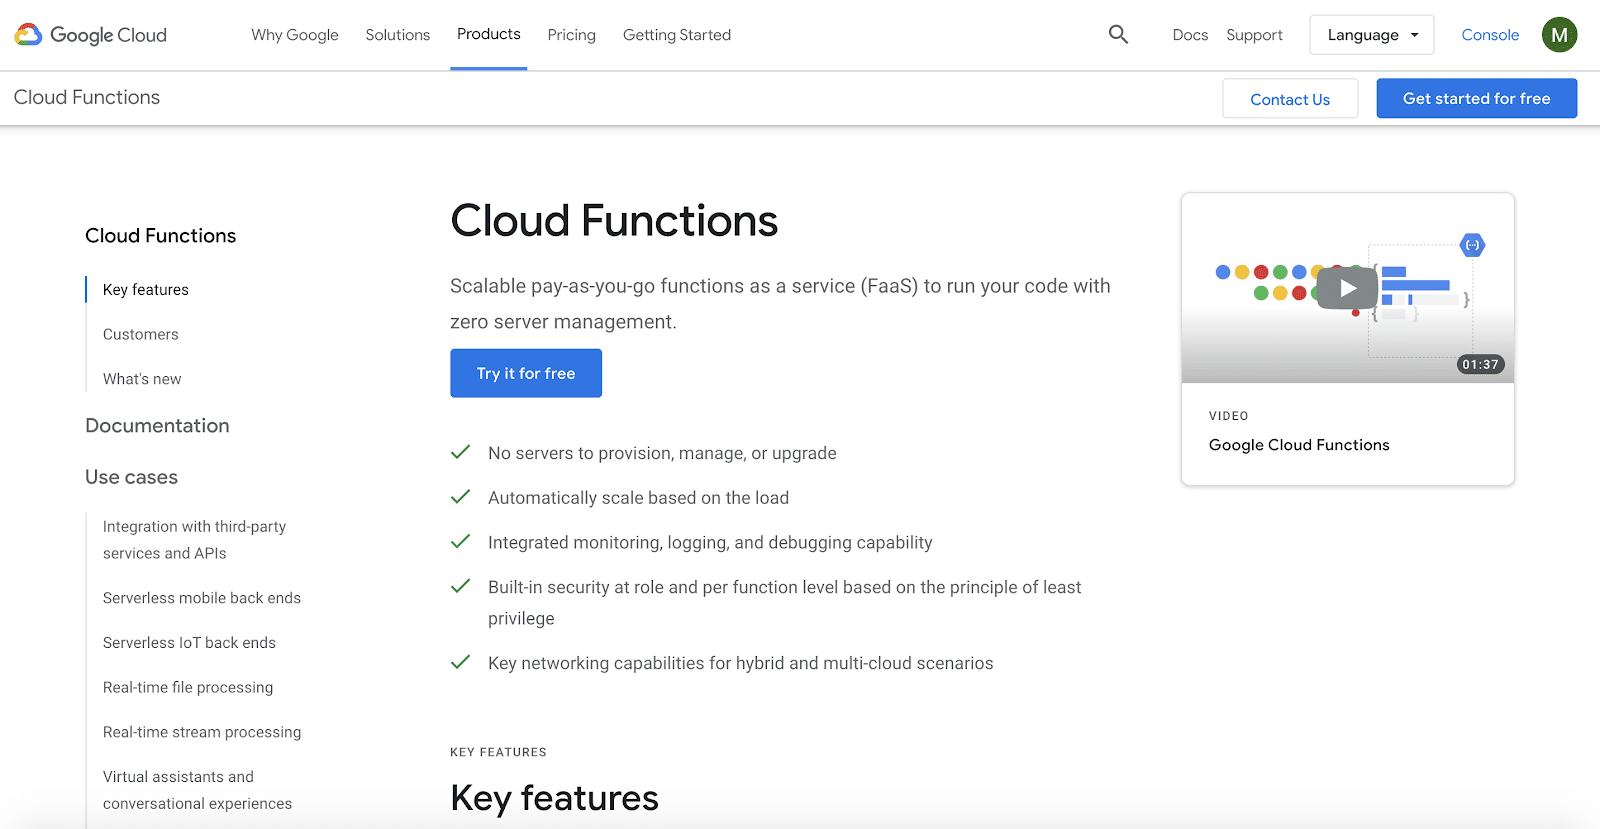 Google Cloud Functions enables companies to run app and software functions in a more streamlined way.